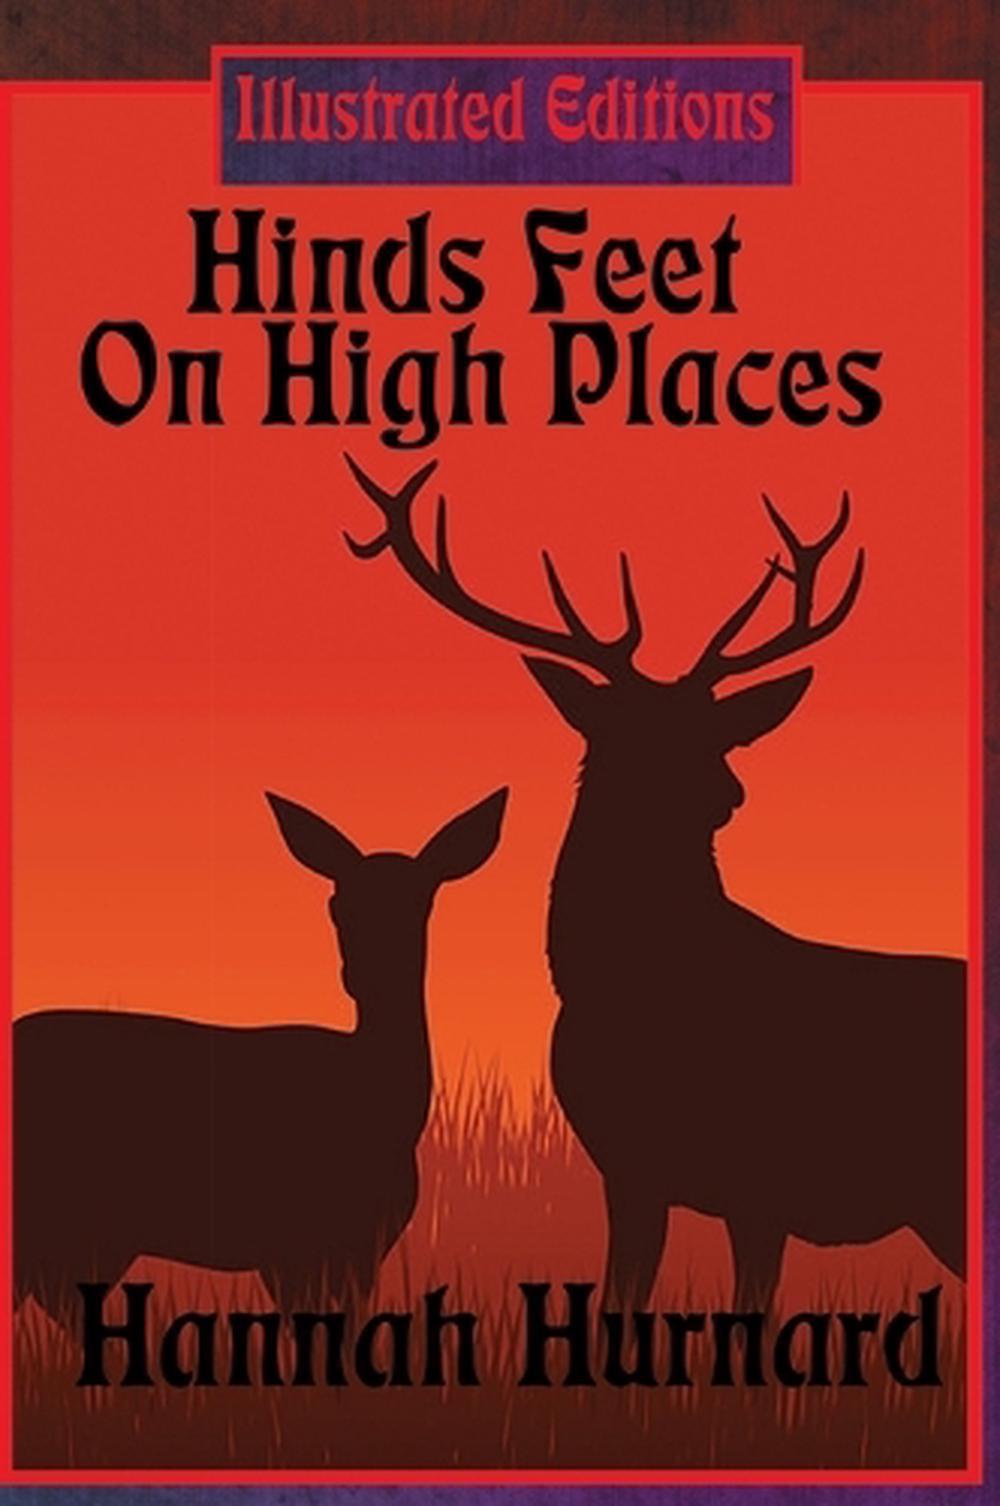 Hinds Feet on High Places (Illustrated Edition) by Hannah Hurnard ...